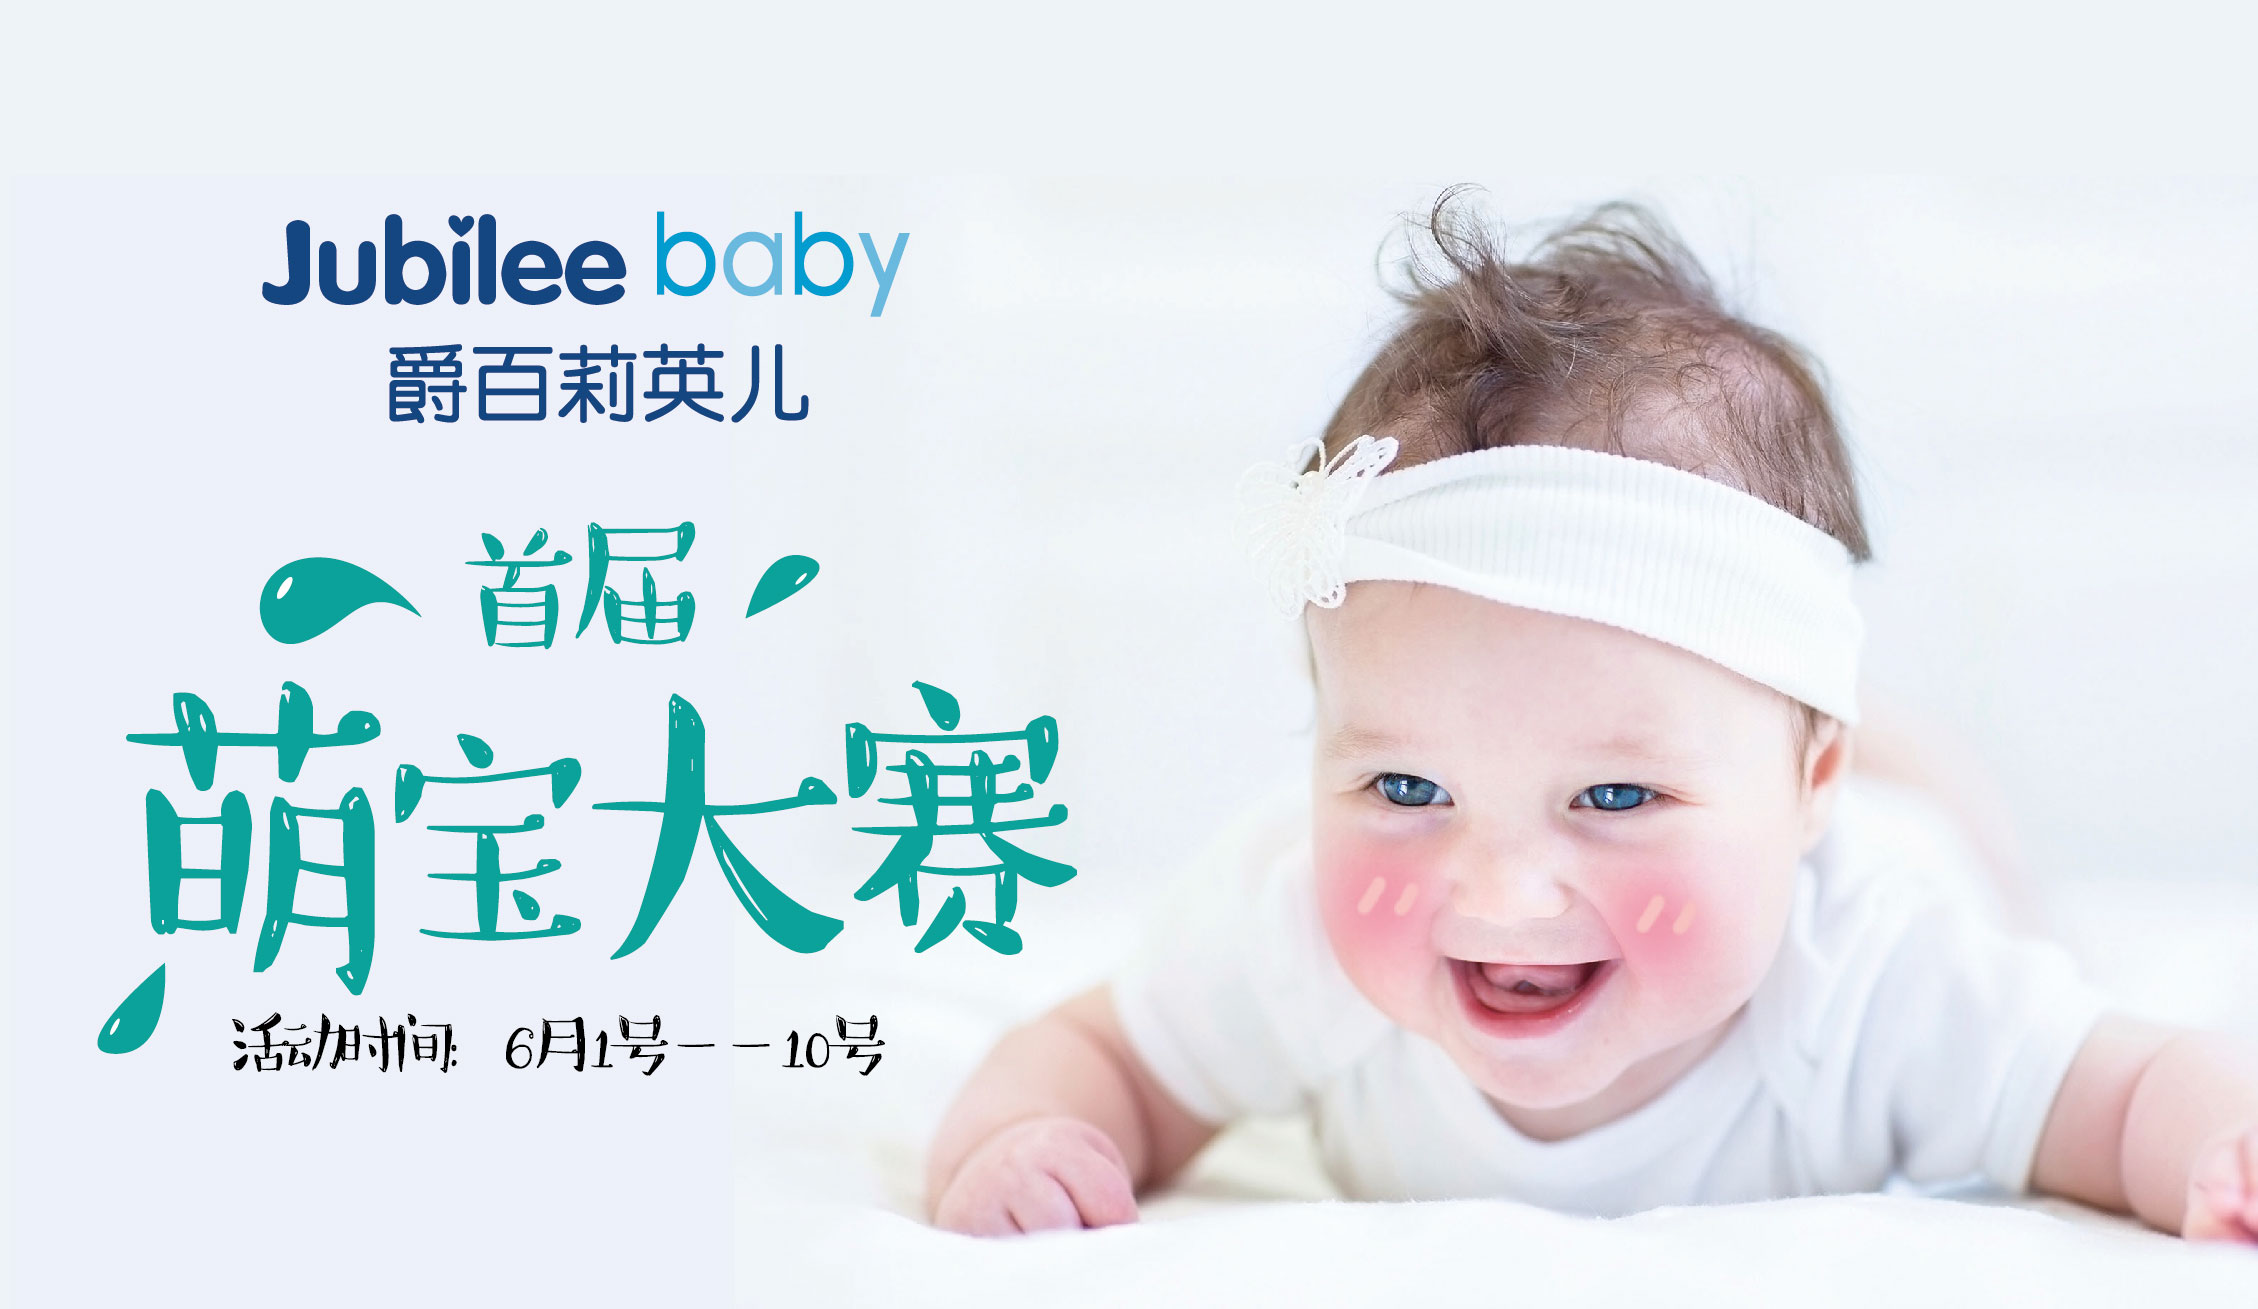 Jubilee’s Cutest Baby Contest!